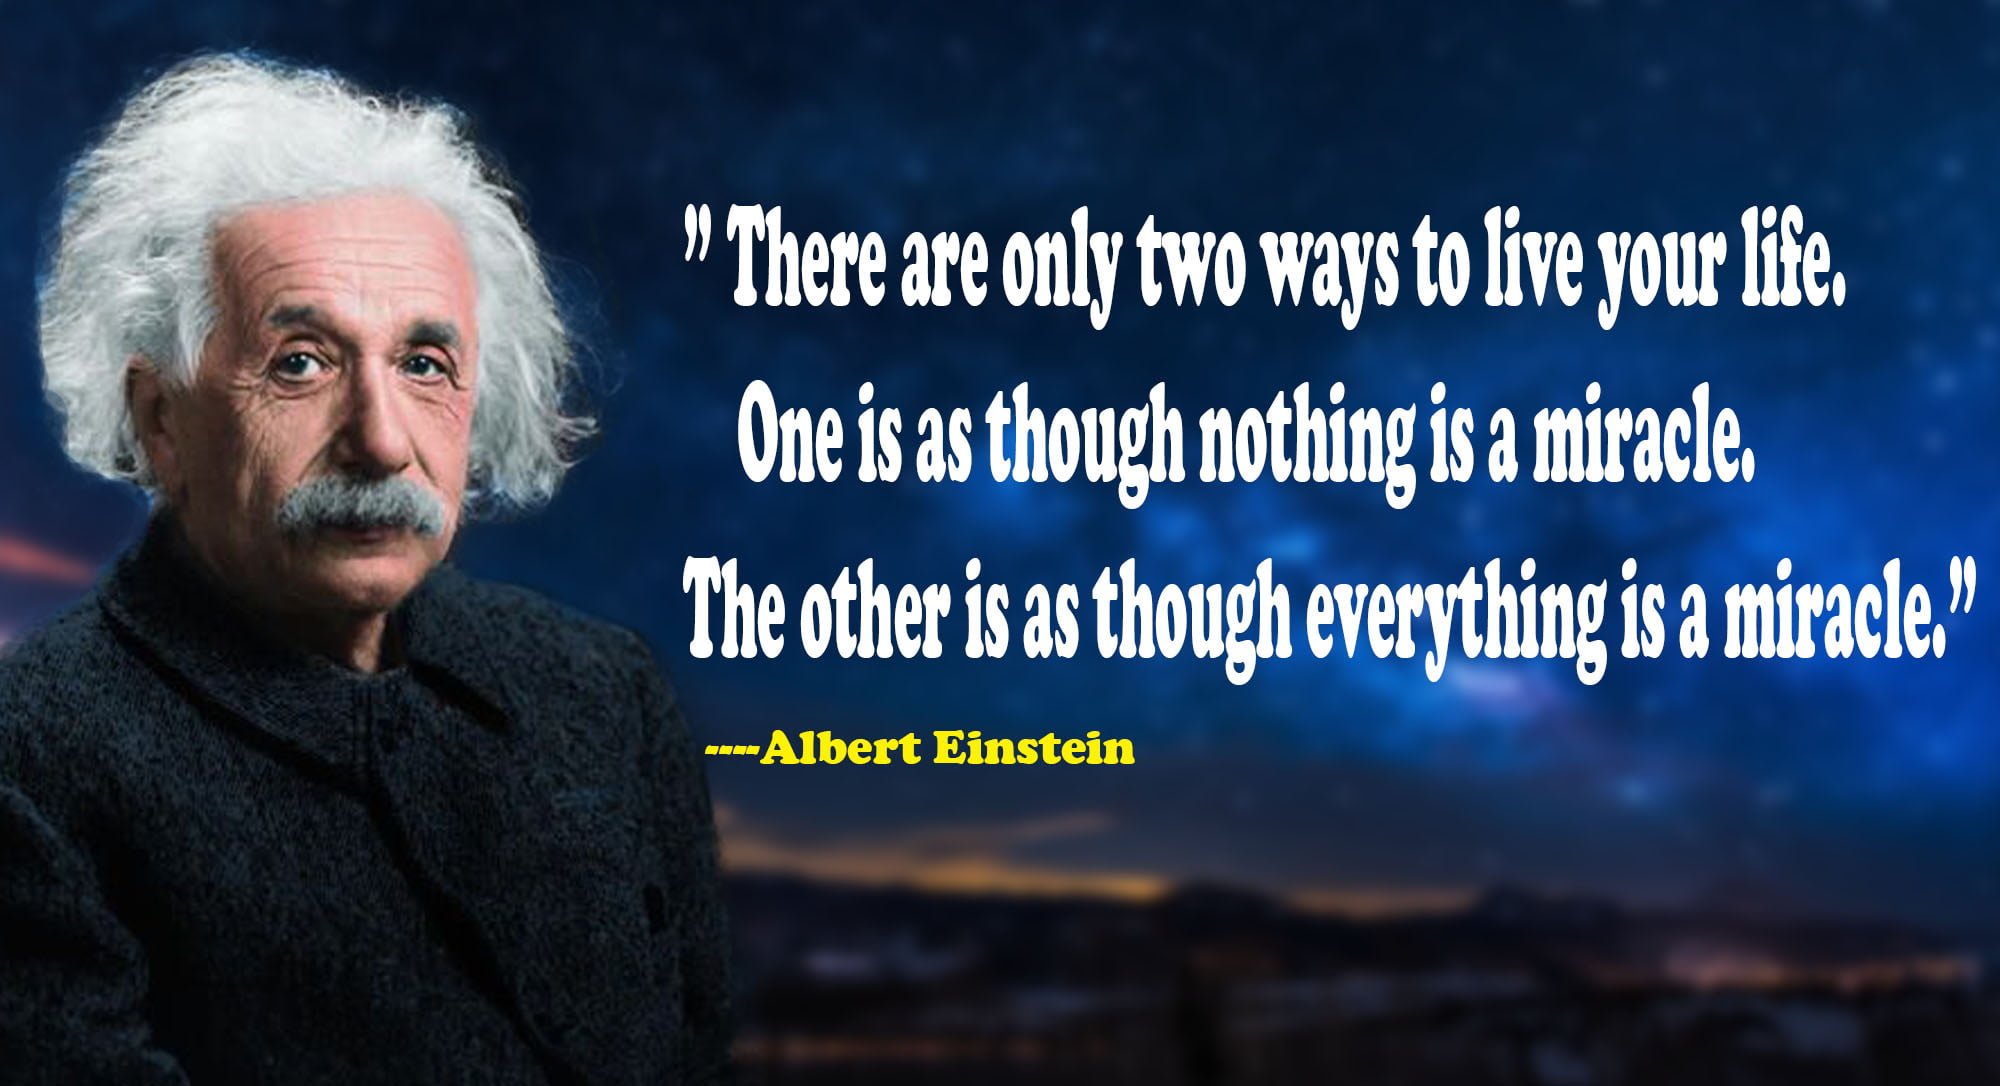 Here are some famous quotations by Albert Einstein